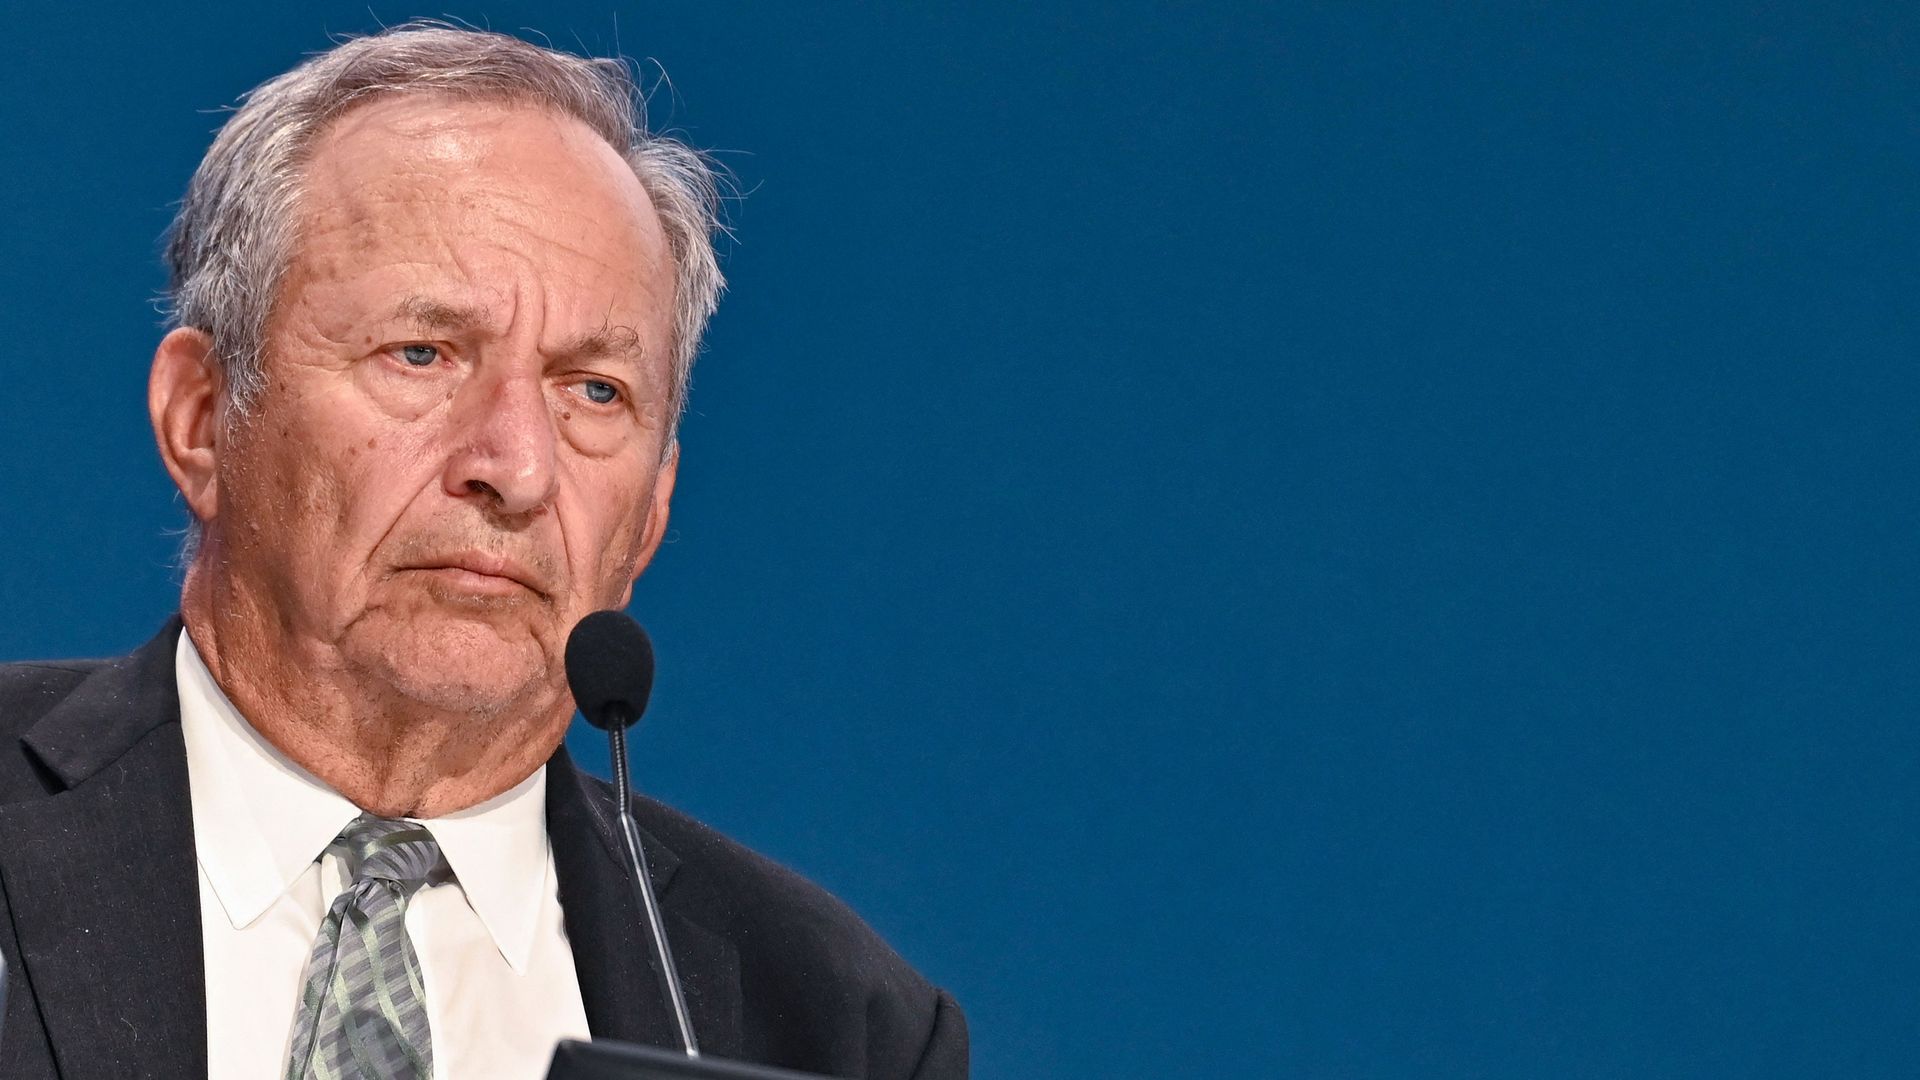 Image of Larry Summers with wrinkled brow at a microphone